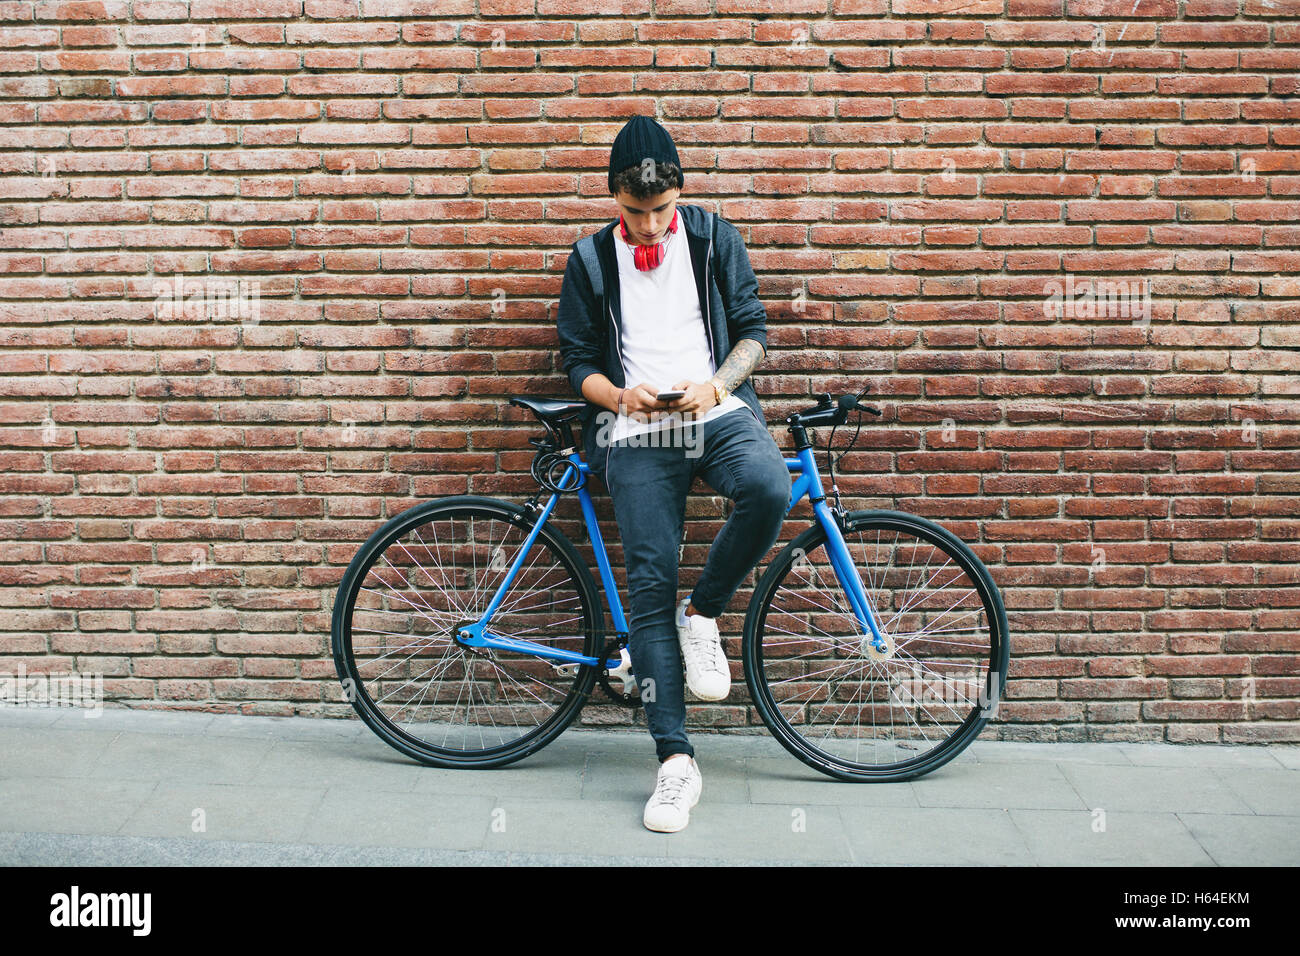 Teenager with a fixie bike, using smartphone Stock Photo